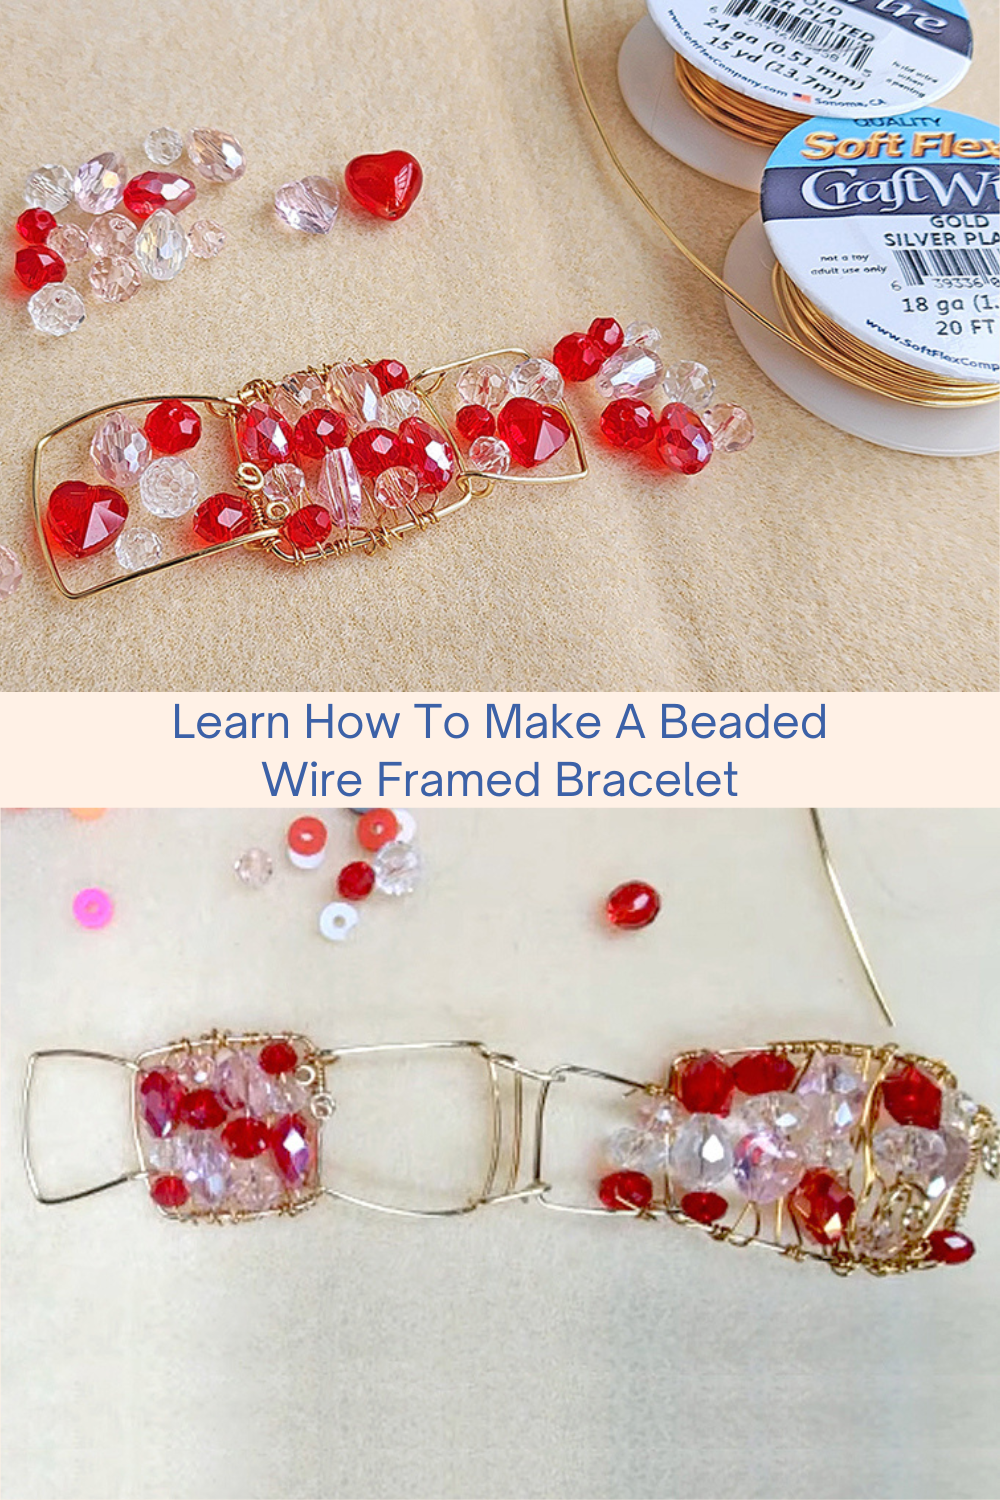 Learn How To Make A Beaded Wire Framed Bracelet Collage